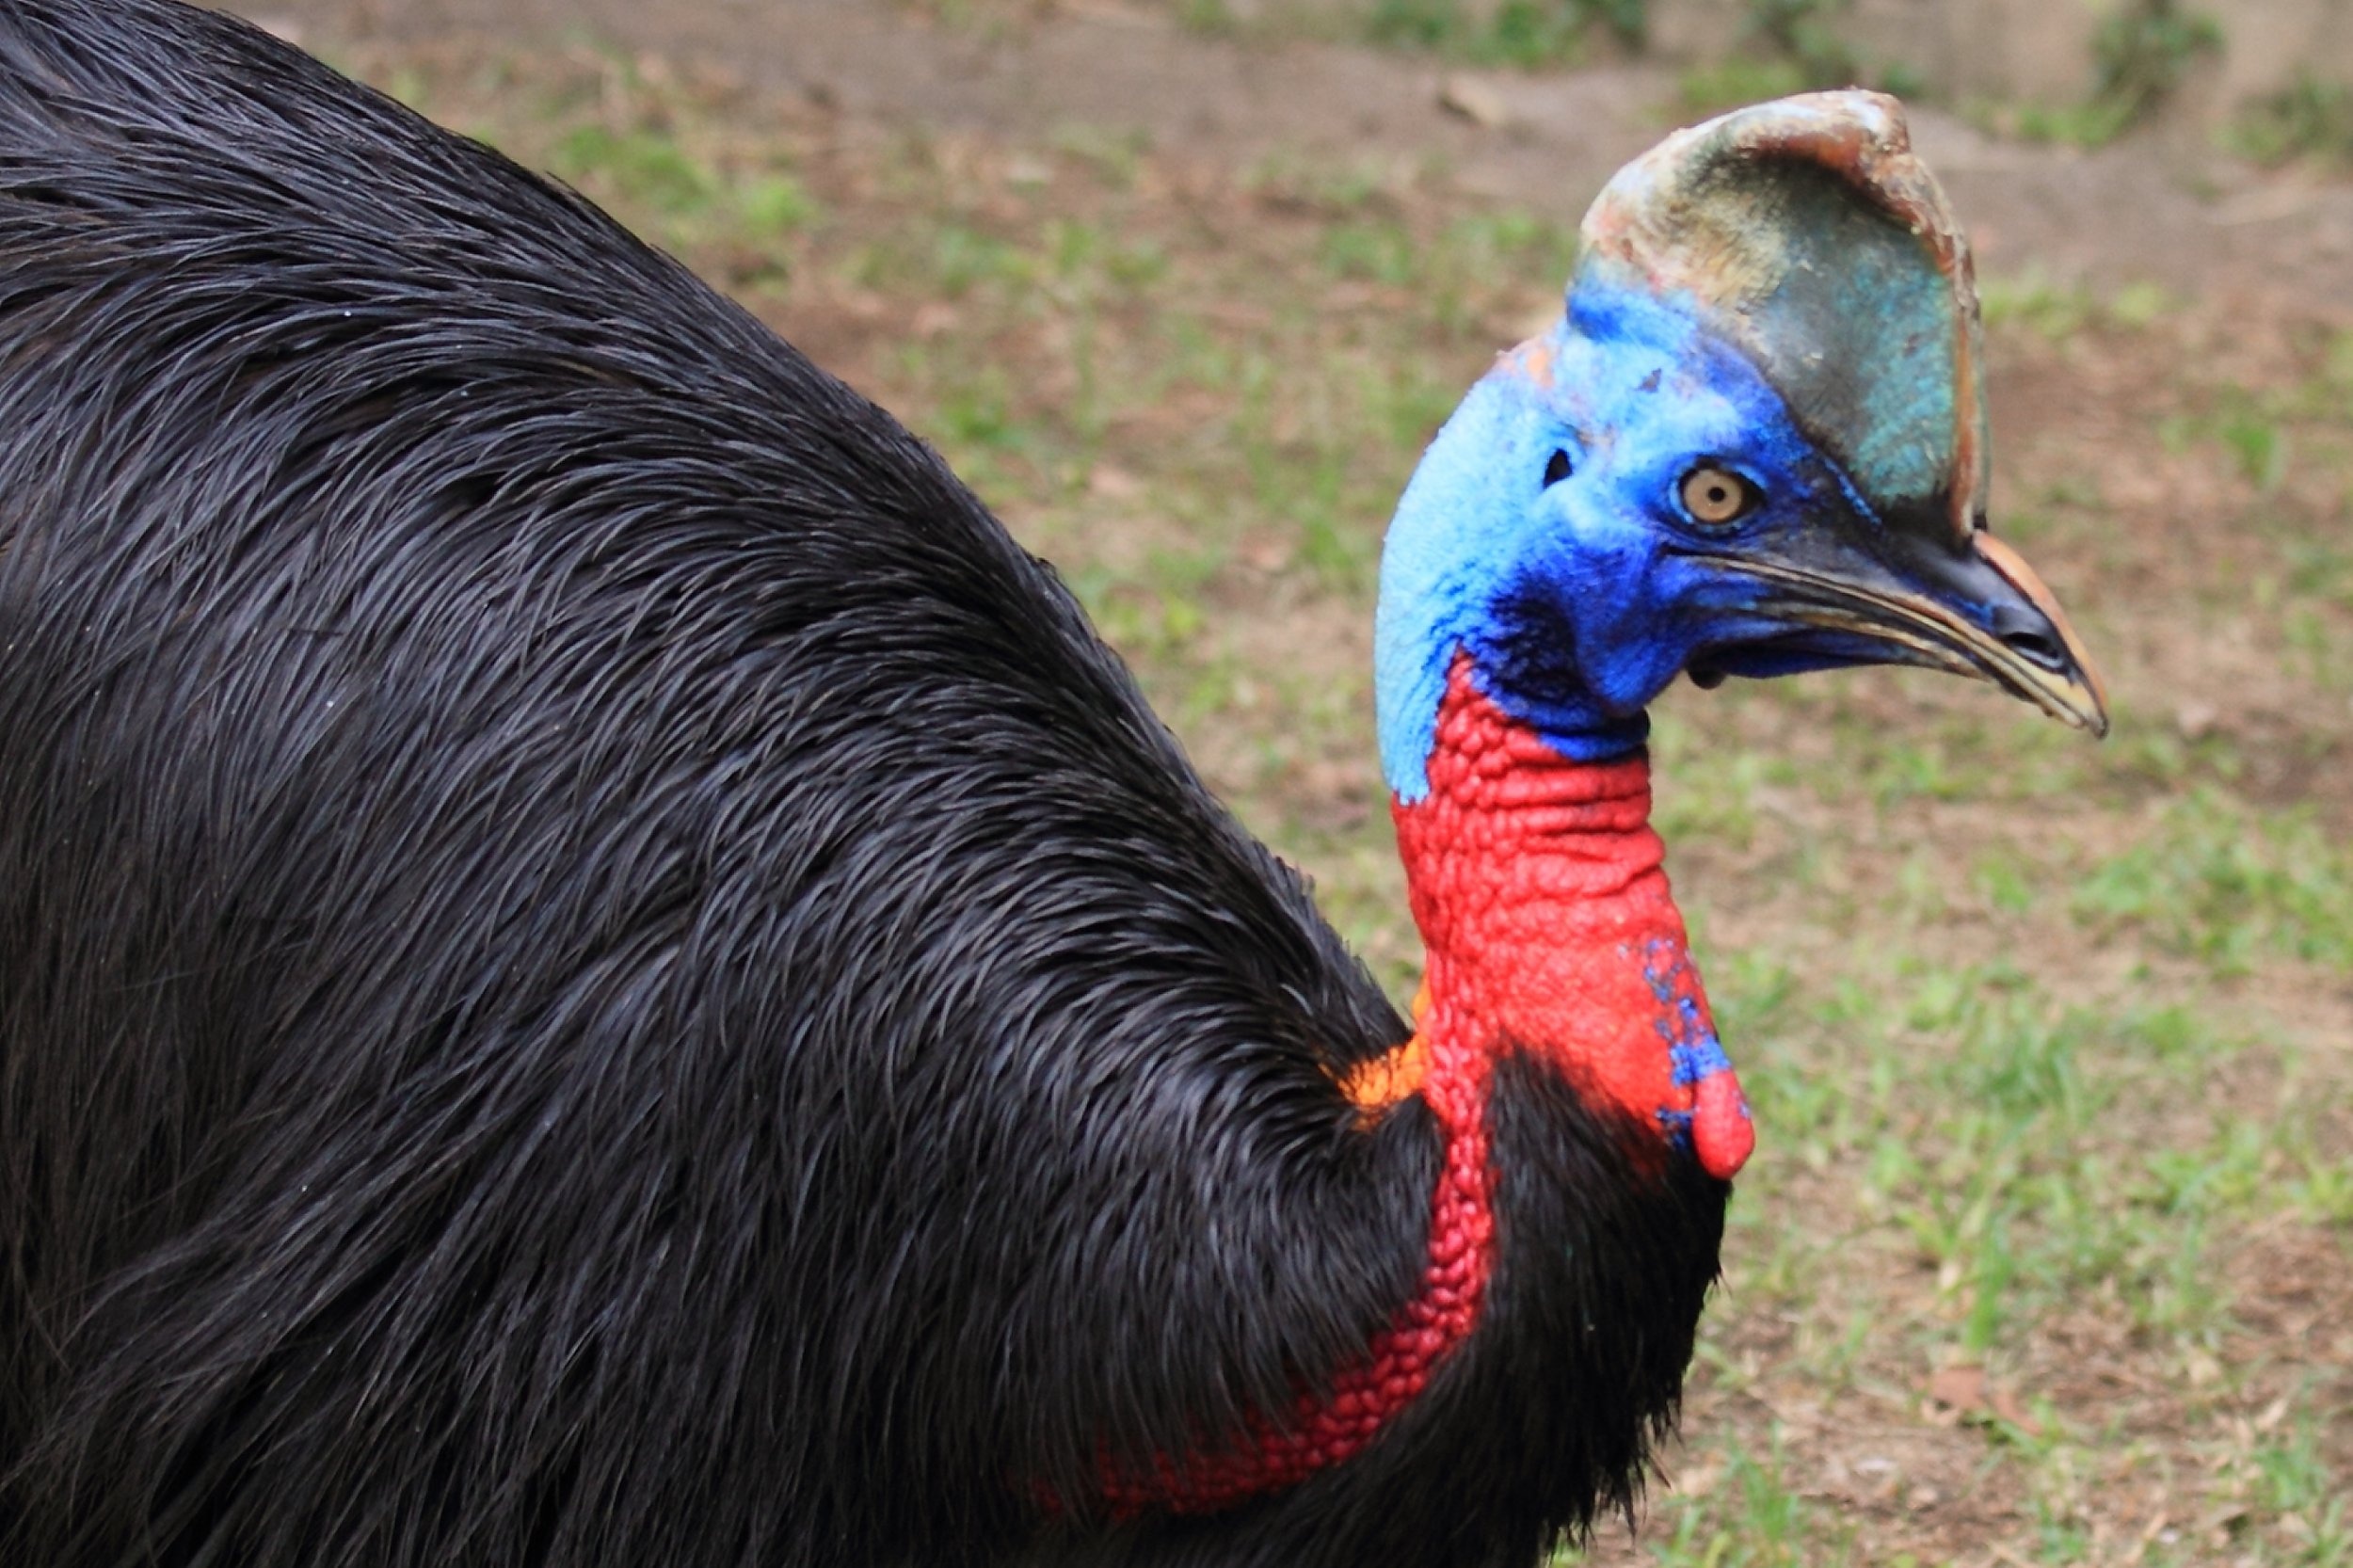 Florida man's lethal encounter, Cassowary's dangerous reputation, Giant exotic bird attack, Deadly claws, 2500x1670 HD Desktop